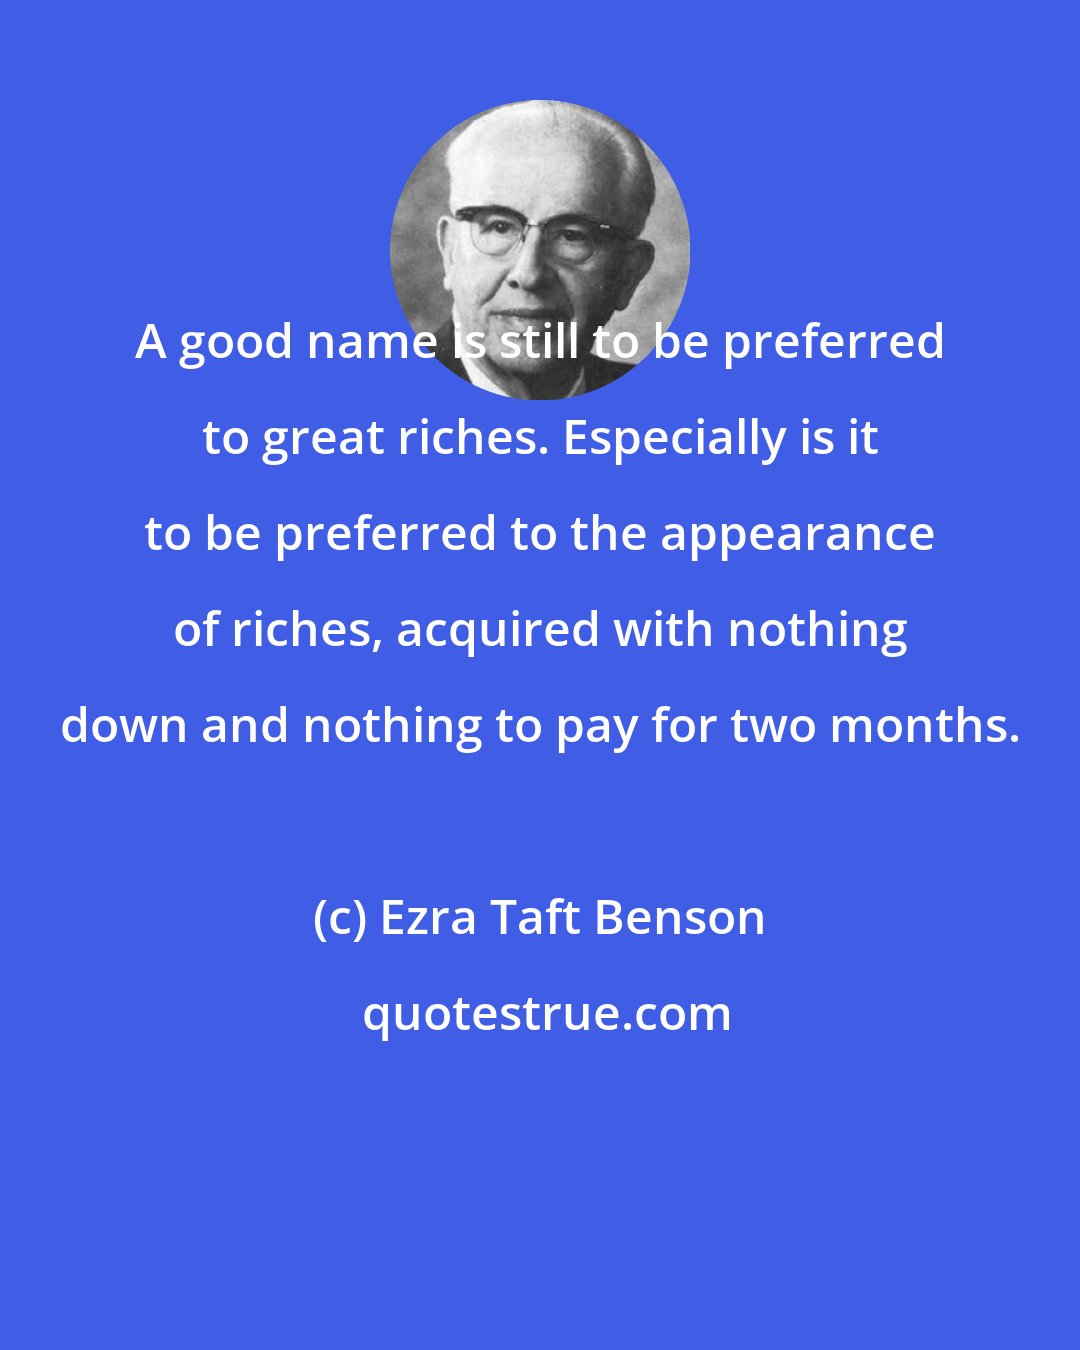 Ezra Taft Benson: A good name is still to be preferred to great riches. Especially is it to be preferred to the appearance of riches, acquired with nothing down and nothing to pay for two months.